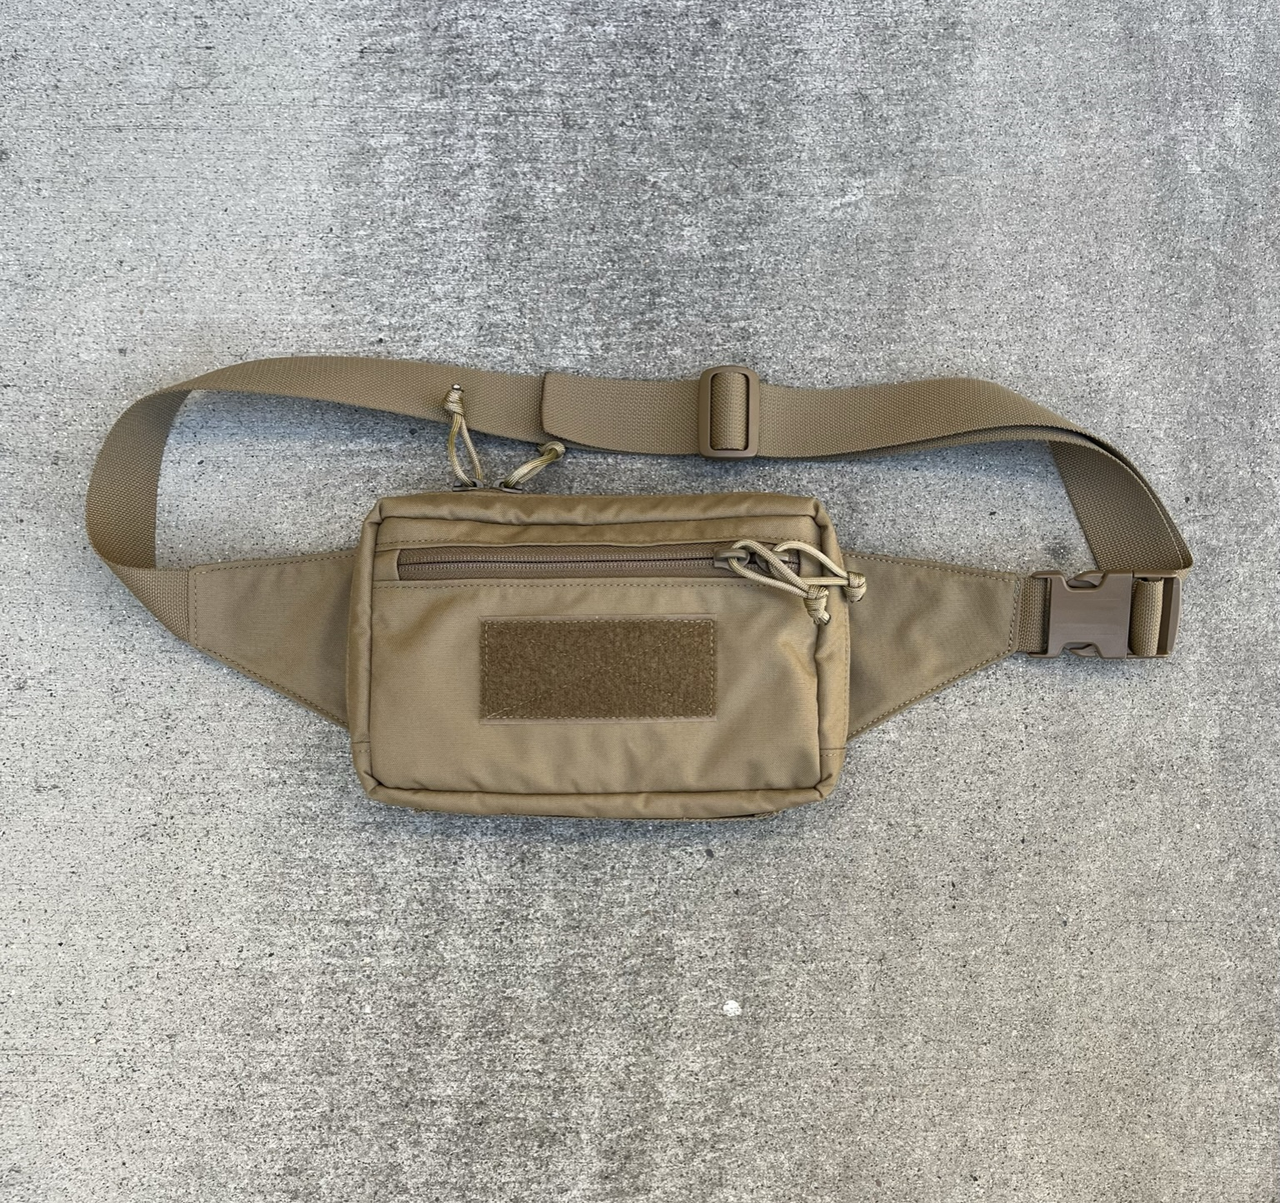 Pouch Review: Head On Tactical Fanny Pack – ATRG